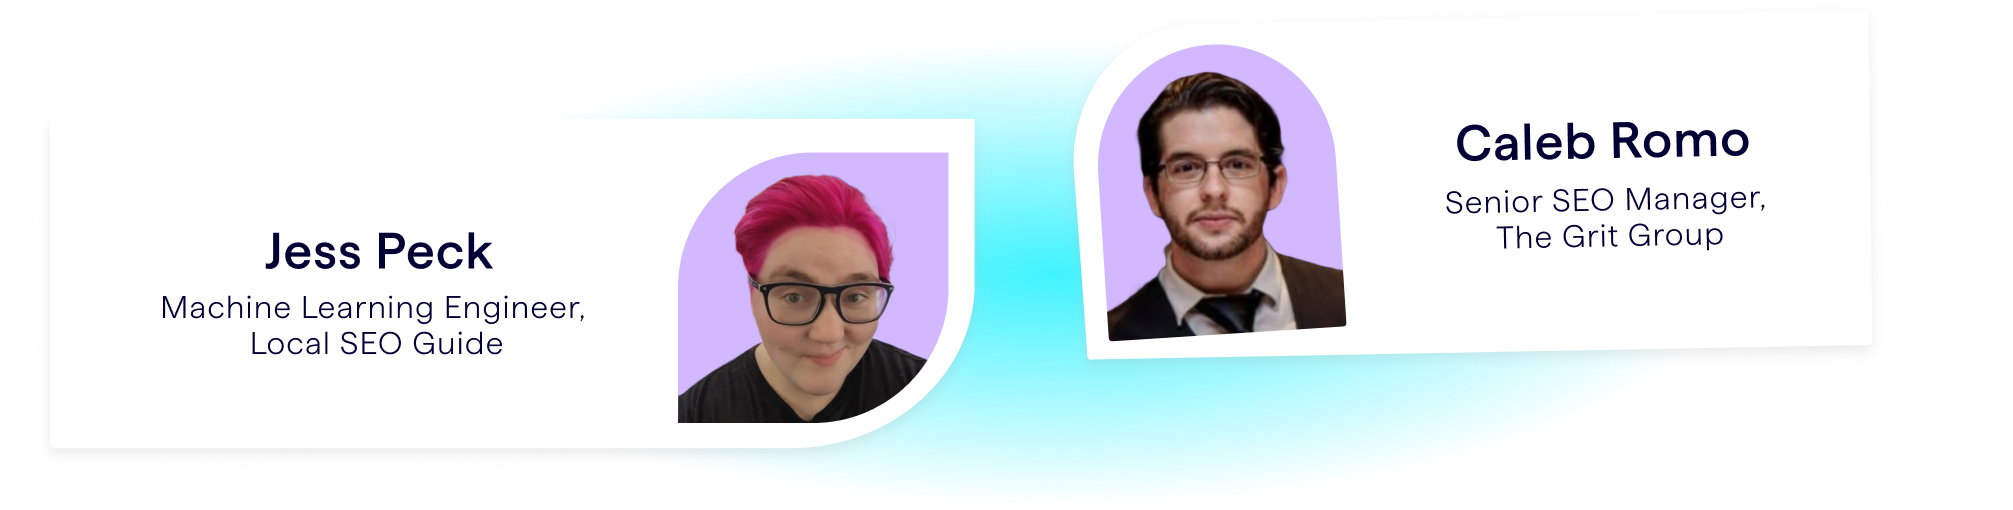 SEO Webinar banner showing speaker photos - Core Web Vitals and GA4 Topic - Featured speakers include Jess Peck, machine learning engineer at Local SEO Guide and Caleb Romo, Senior SEO Manager at the Grit Group